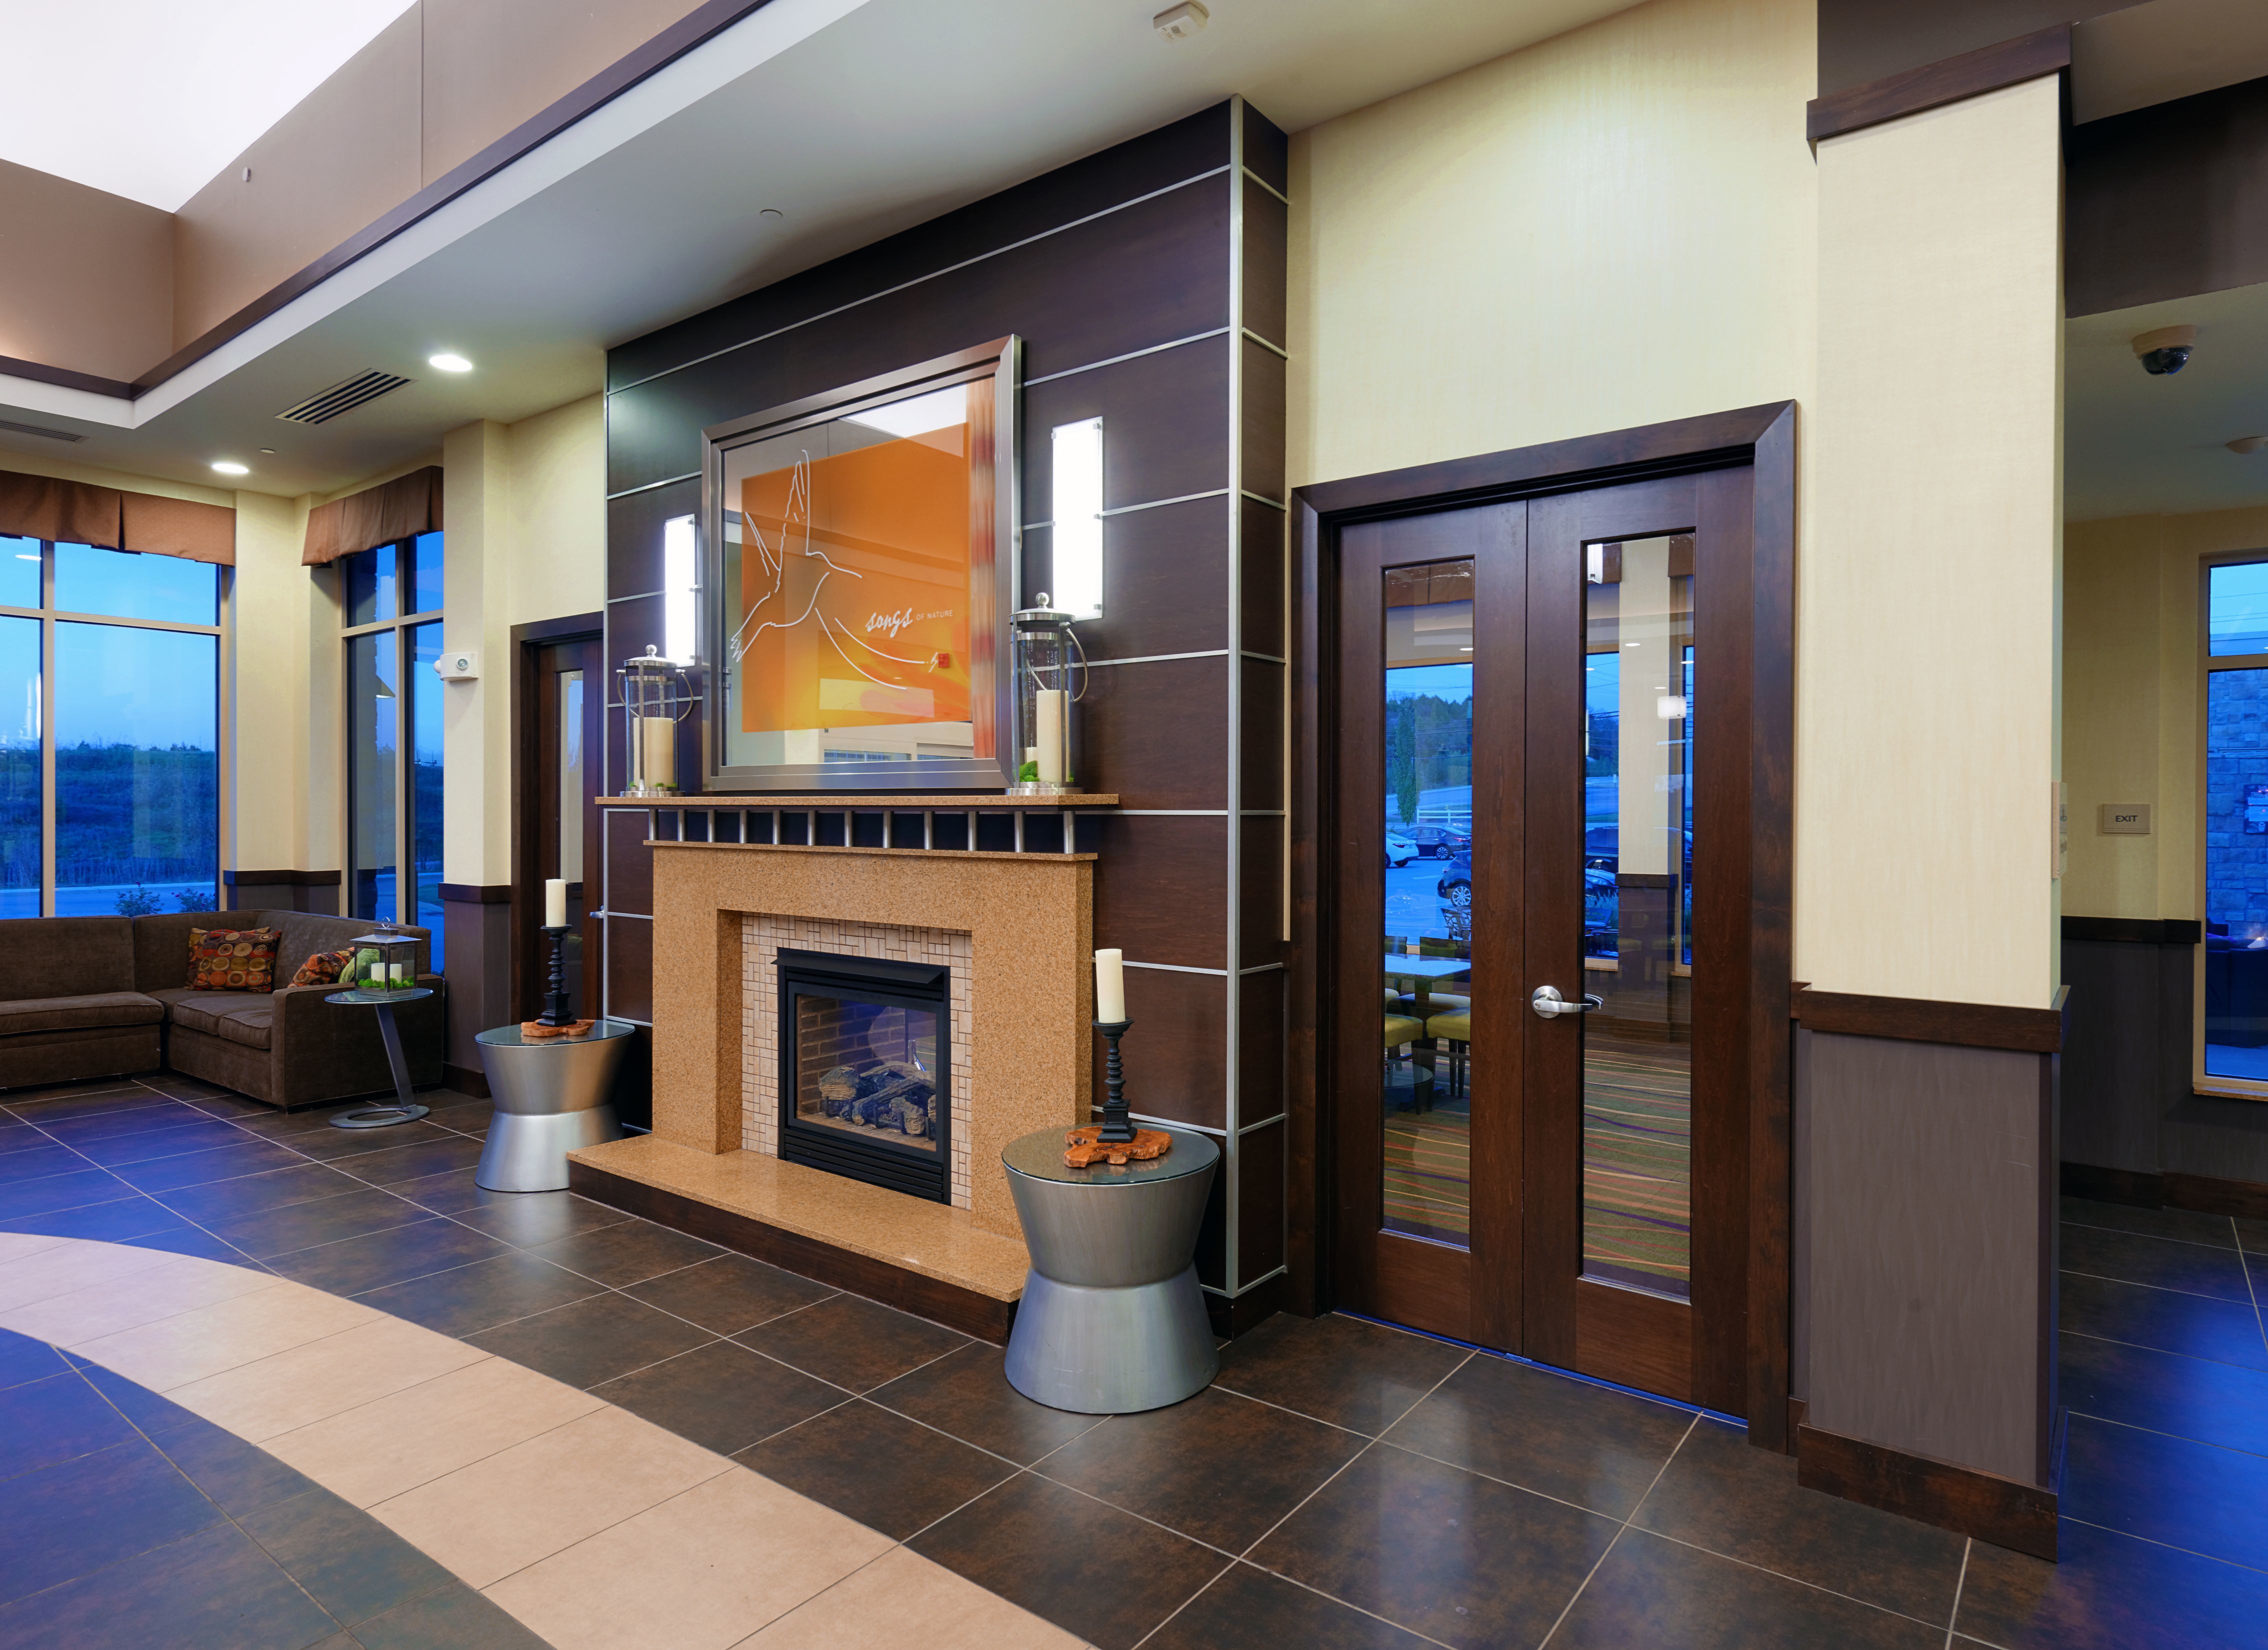 Lobby Area with Fireplace